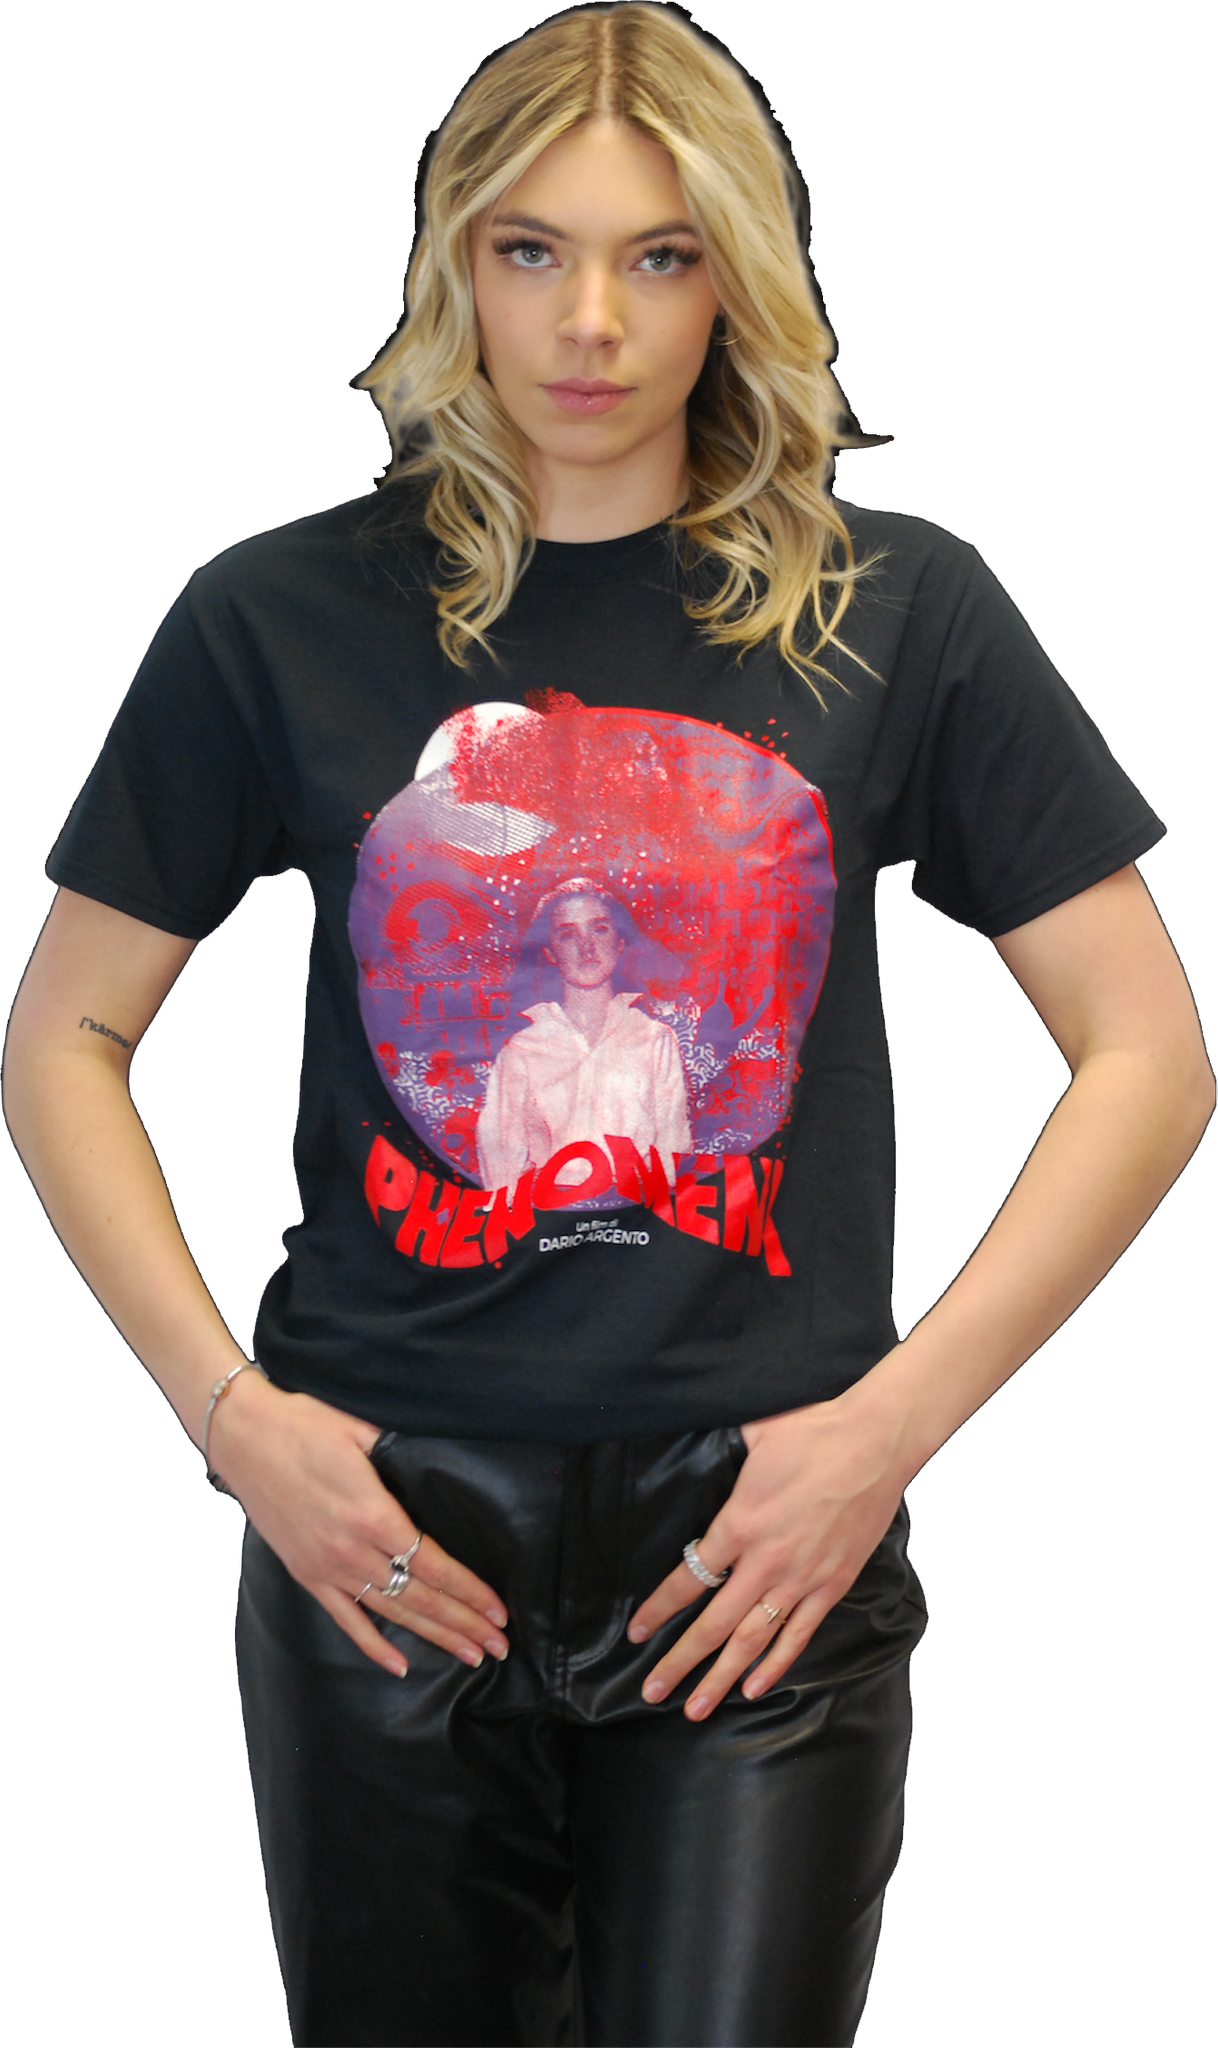 DARIO ARGENTO - LIMITED EDITION “PHENOMENA” T-SHIRT DESIGNED BY DANNY WEST